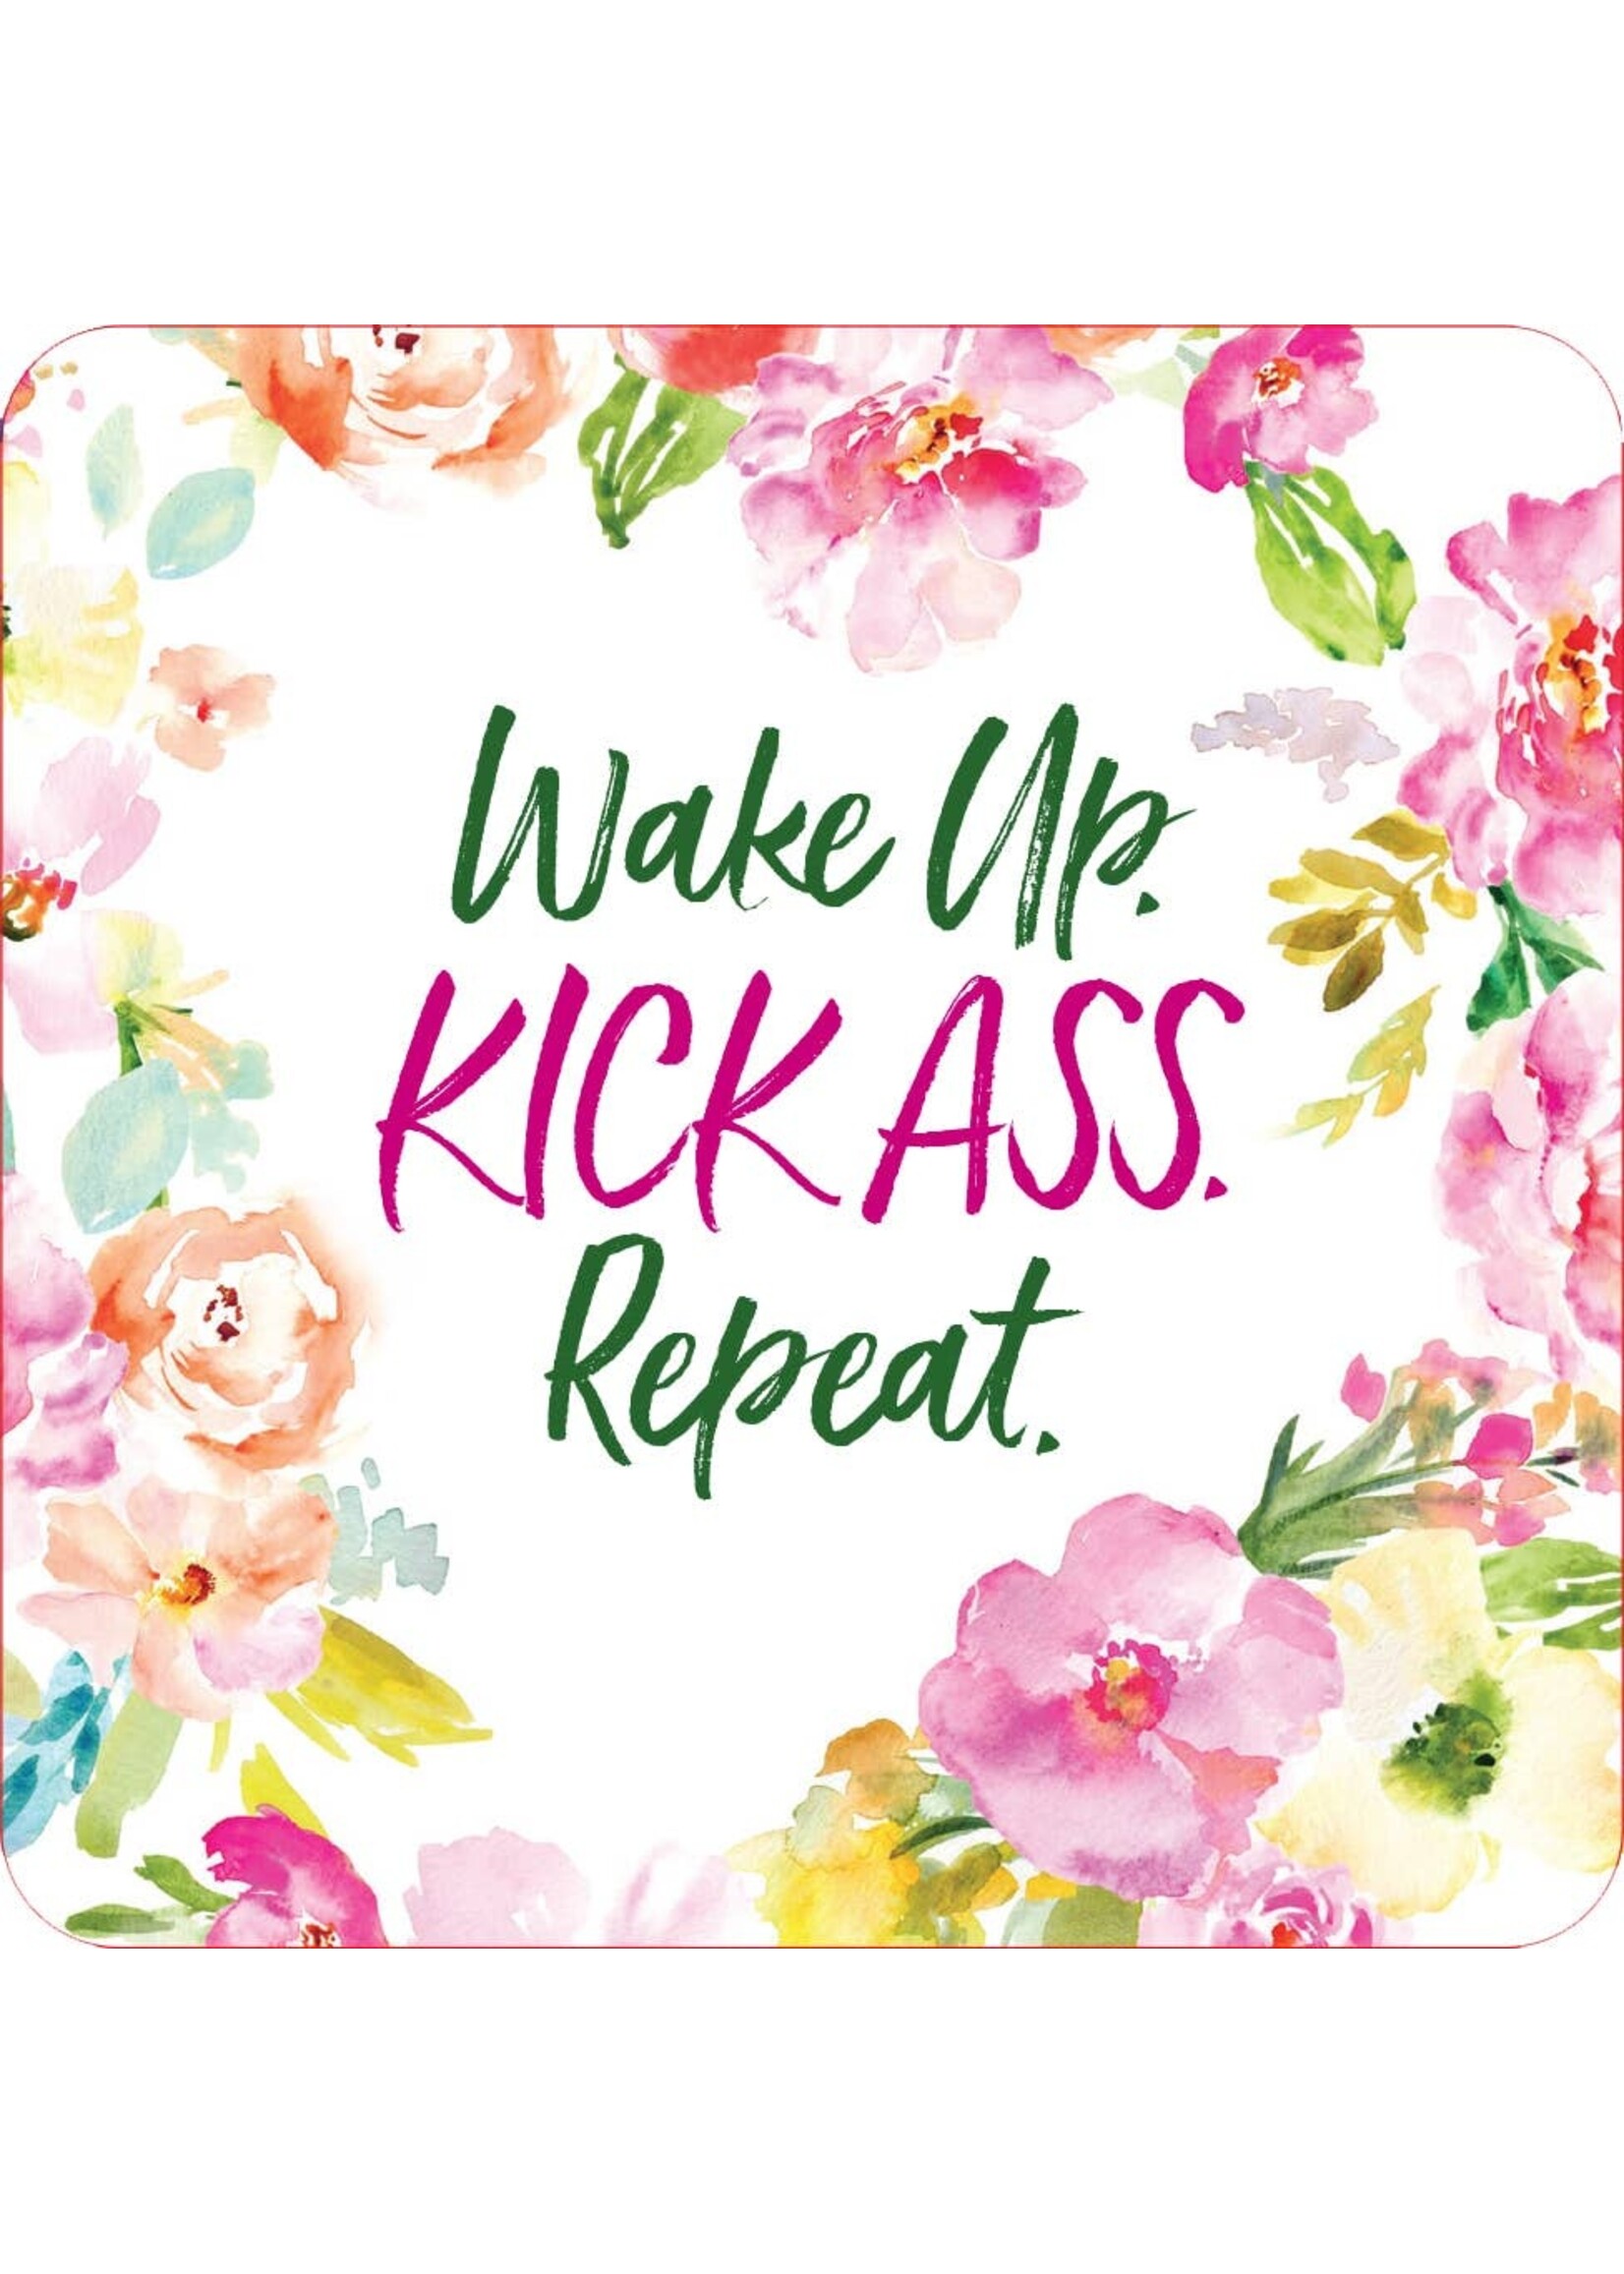 PPP WAKE UP KICK ASS REPEAT CARDS